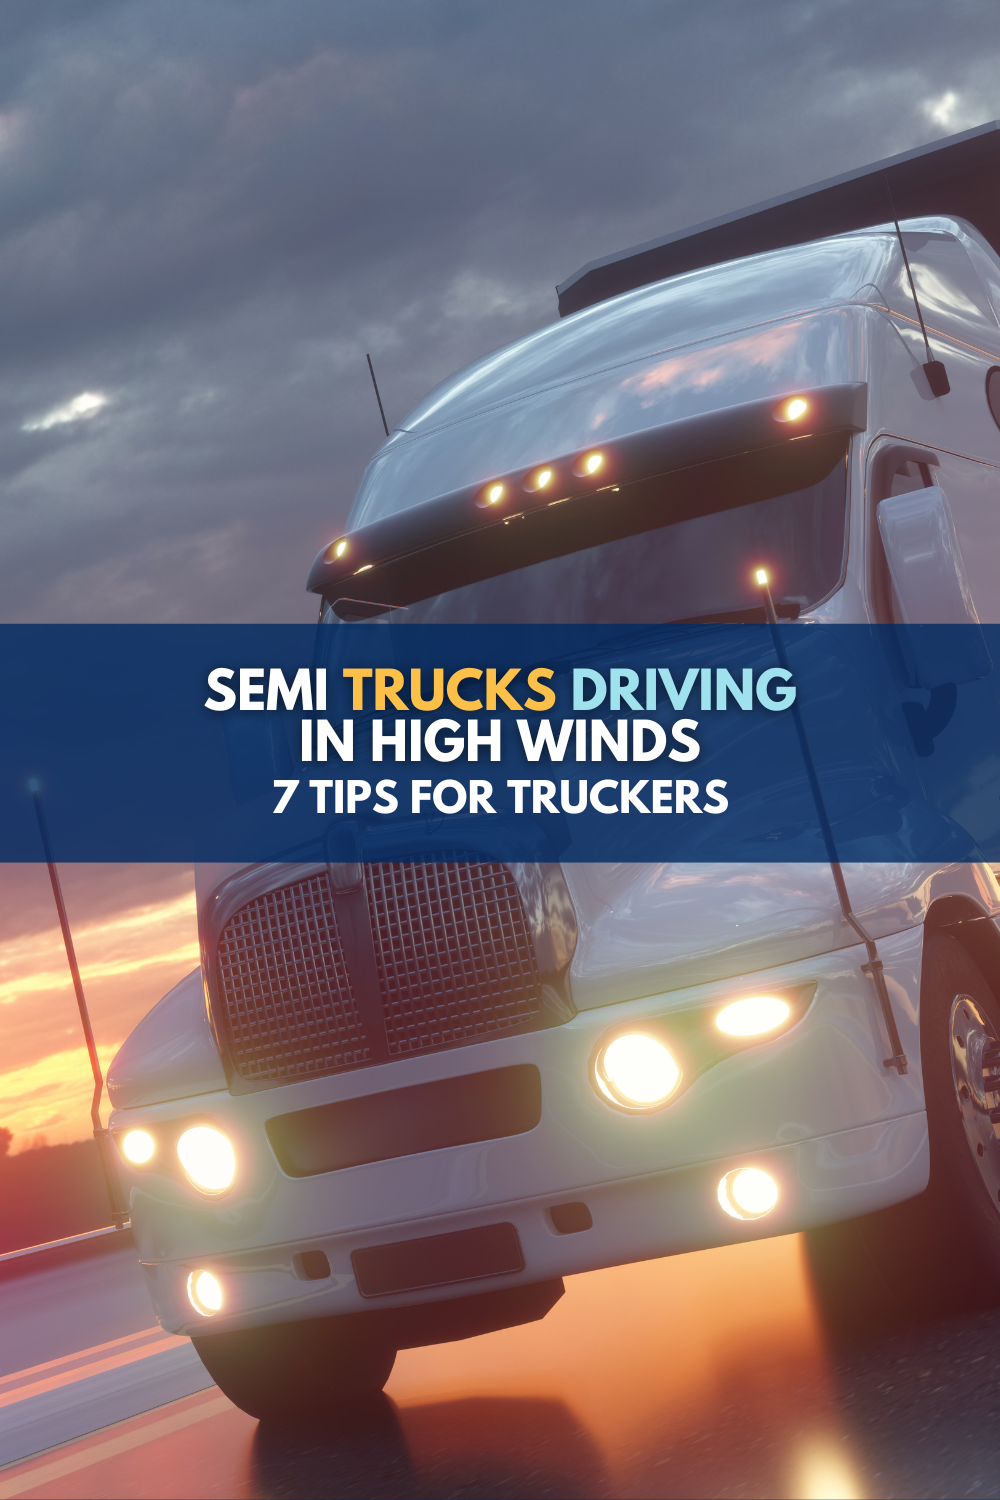 Semi Trucks Driving In High Winds: 7 Tips For Truckers